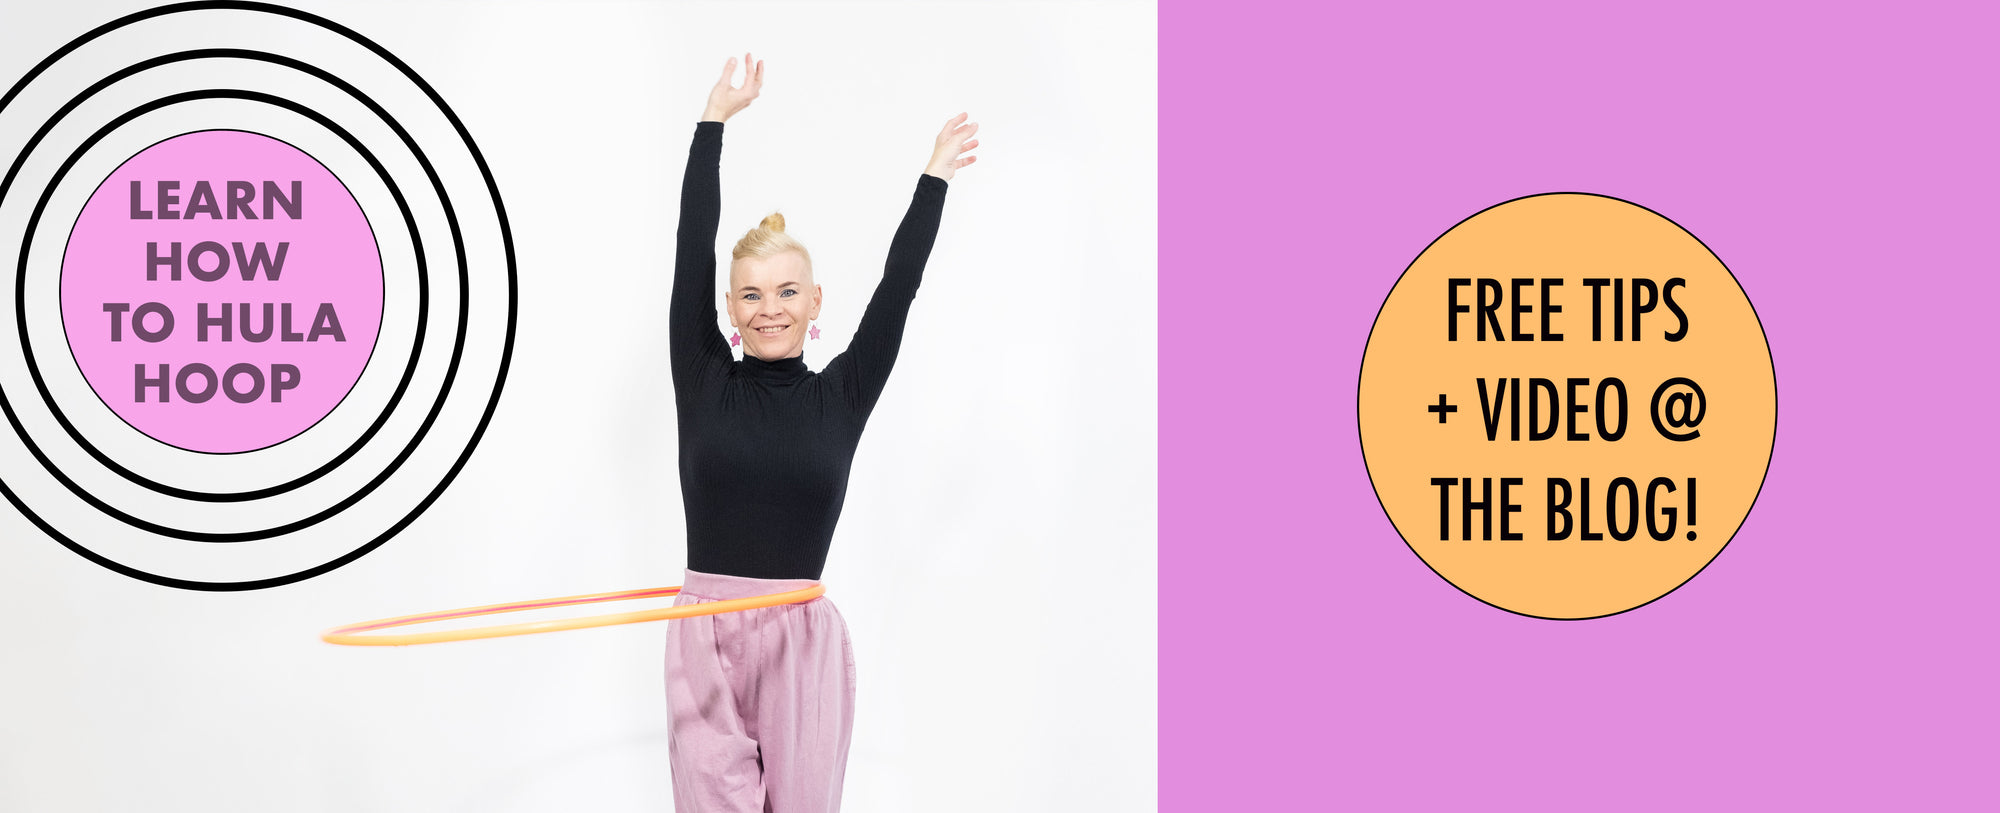 Learn how to hula hoop with Bunny Star